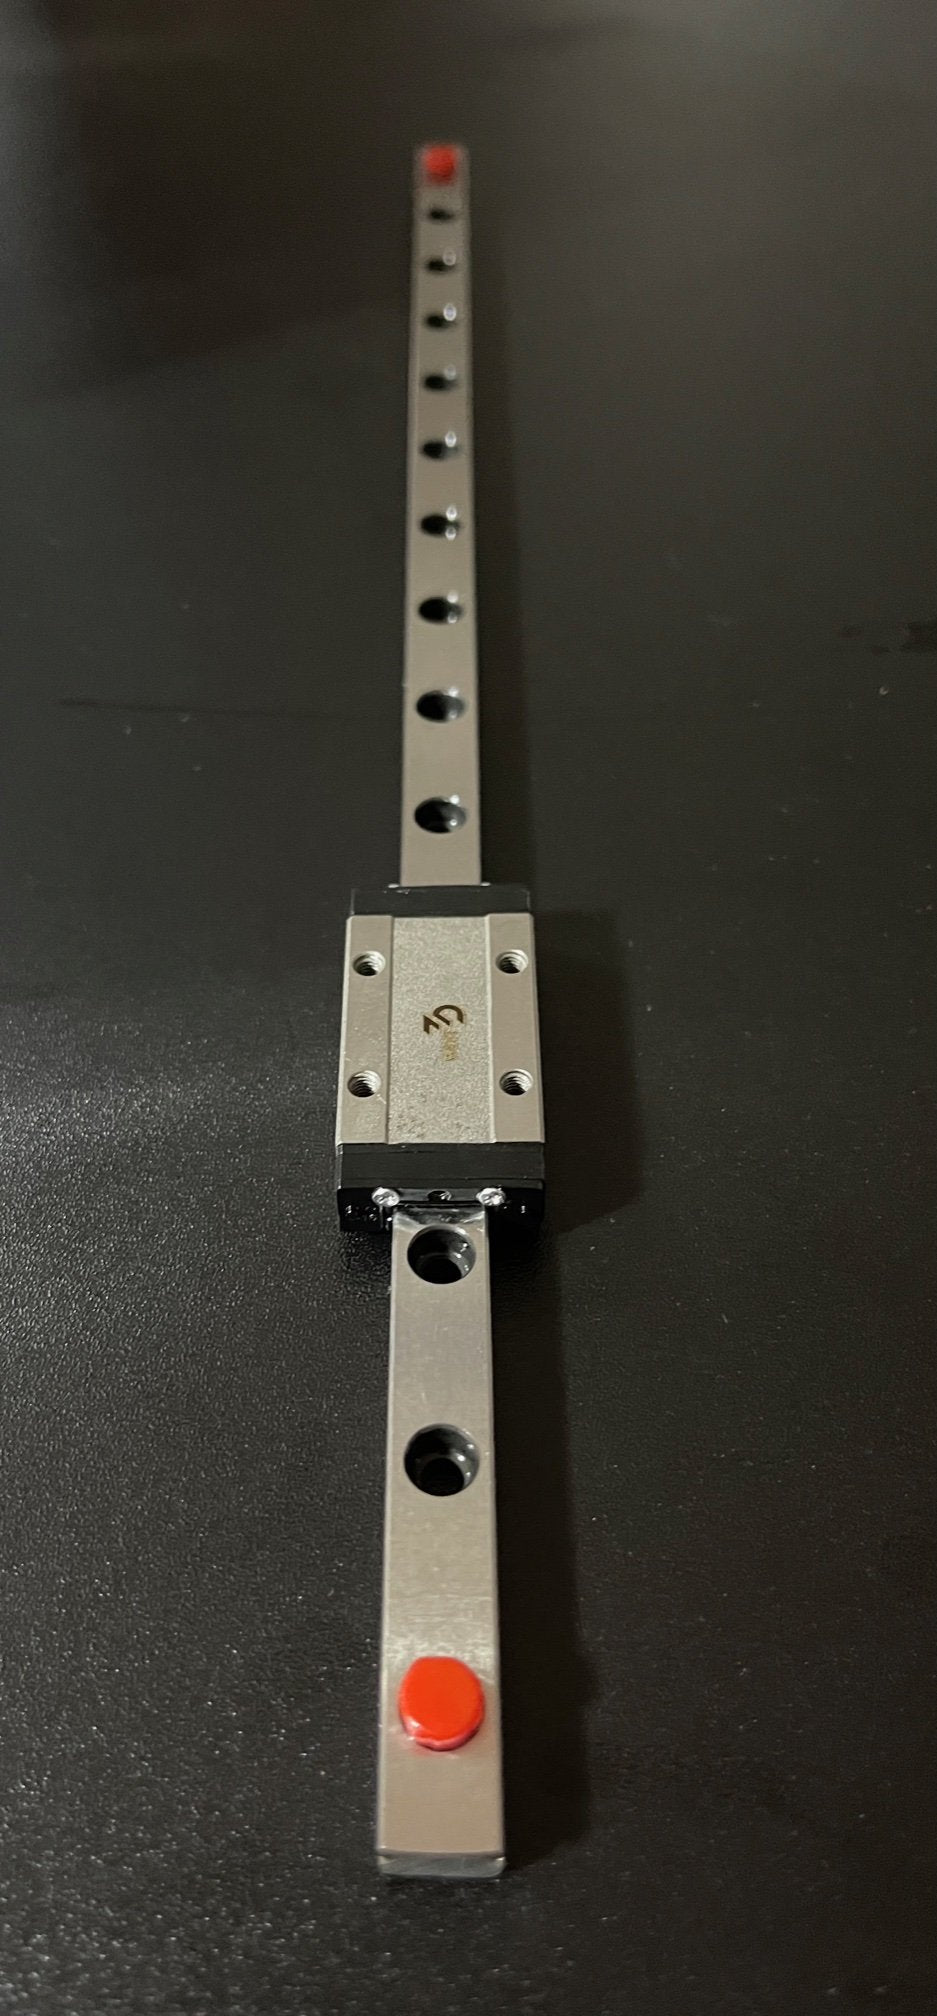 West3D Printing MGN9H-1R-150/300/350/400 Linear Rails with Carriages (CNA) - West3D Printing - CNA / West3D